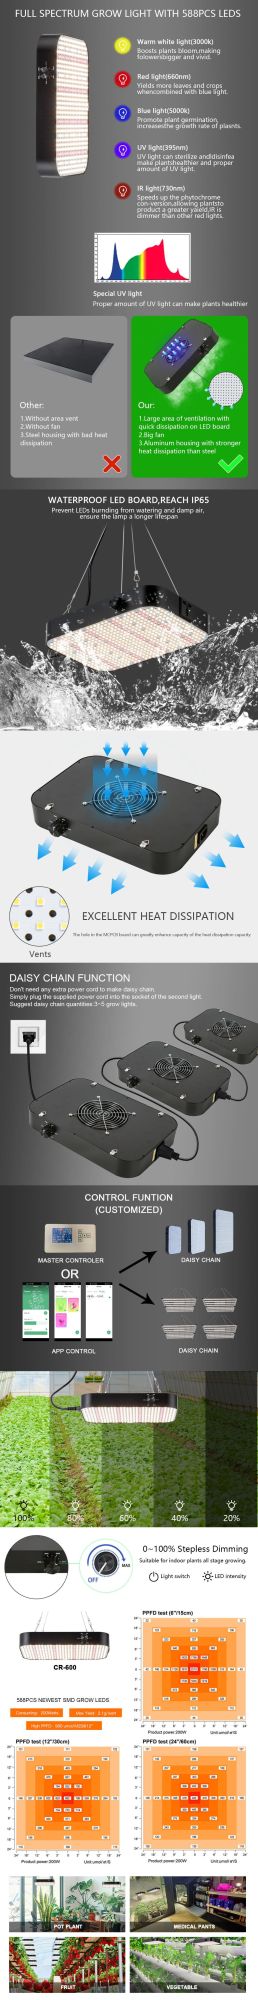 130W Full Spectrum LED Growing Lamp for Indoor Hydroponic Greenhouse Plants Veg and Flowers with Double Switch, Daisy Chain, Adjustable Rope Hanger, Hygro